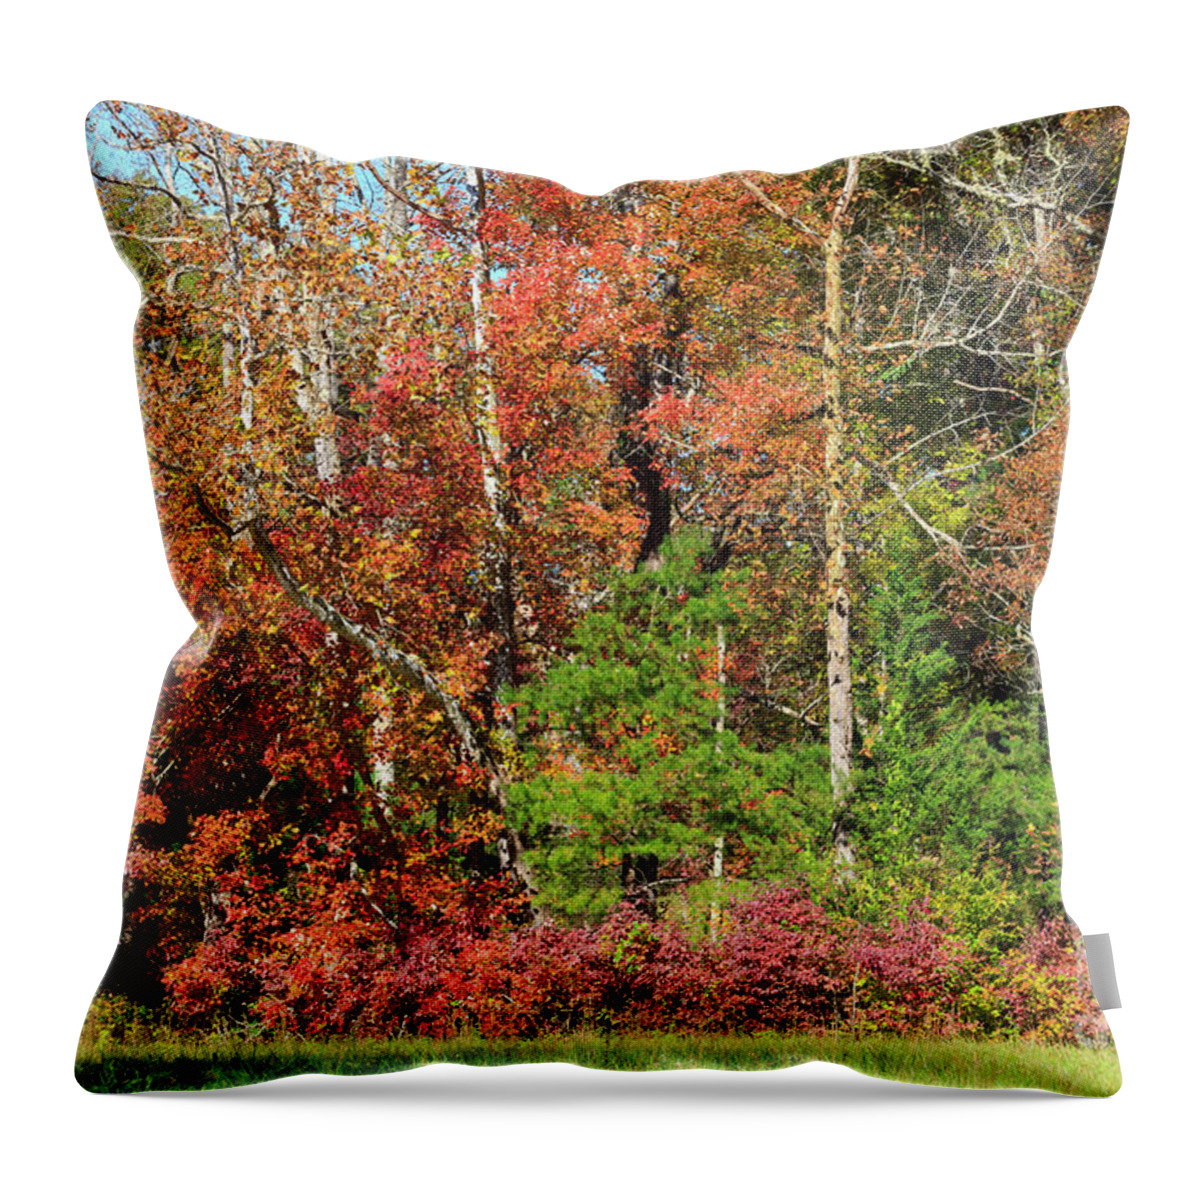 Cades Cove Throw Pillow featuring the photograph Autumn colours in Great Smoky Mountains National Park #1 by Louise Heusinkveld